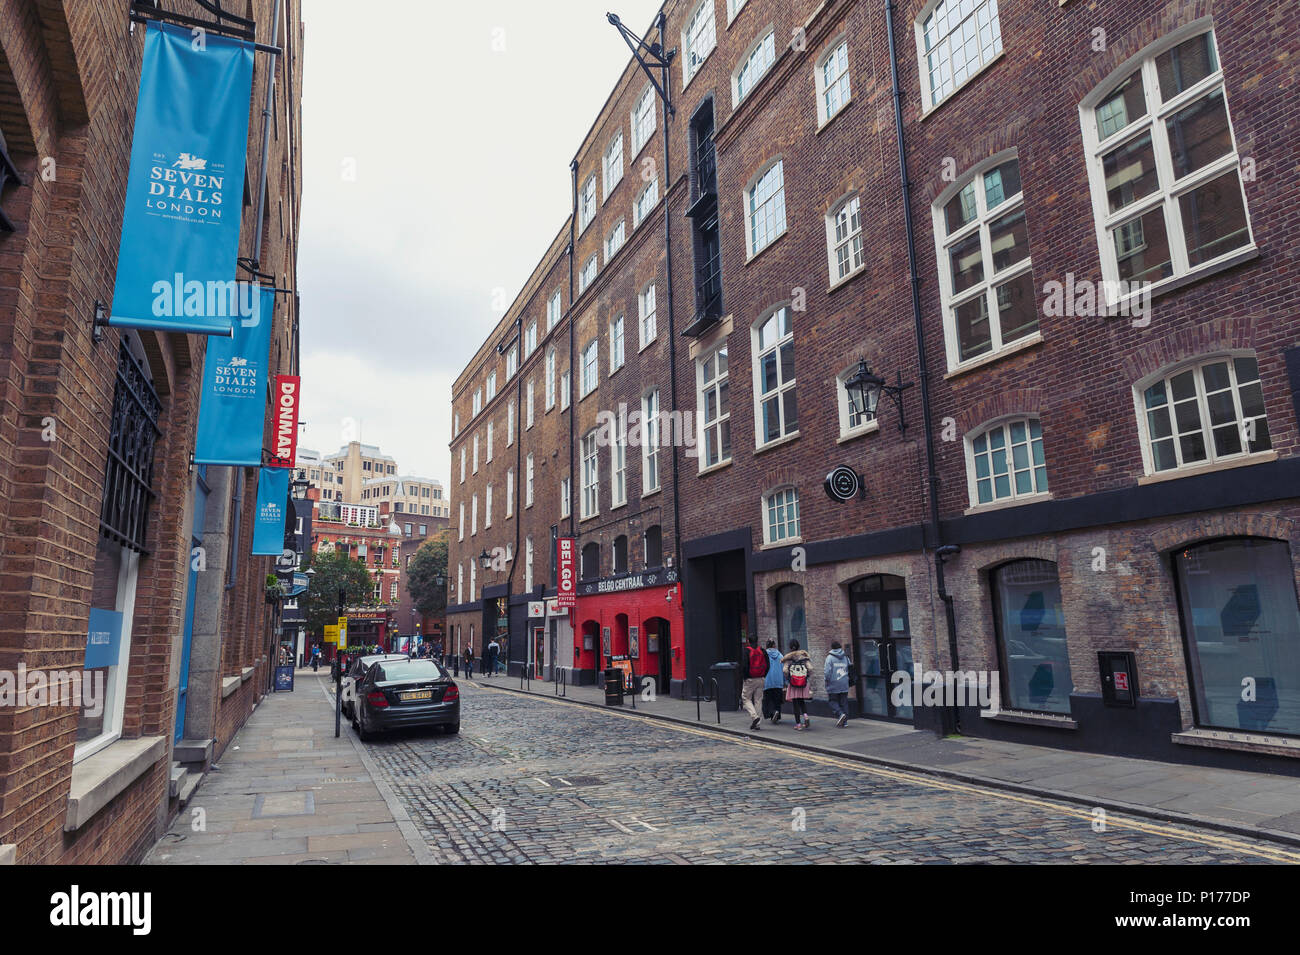 Cobbled alley of Earlham Street seen from the Seven Dials in central London, England, UK Stock Photo